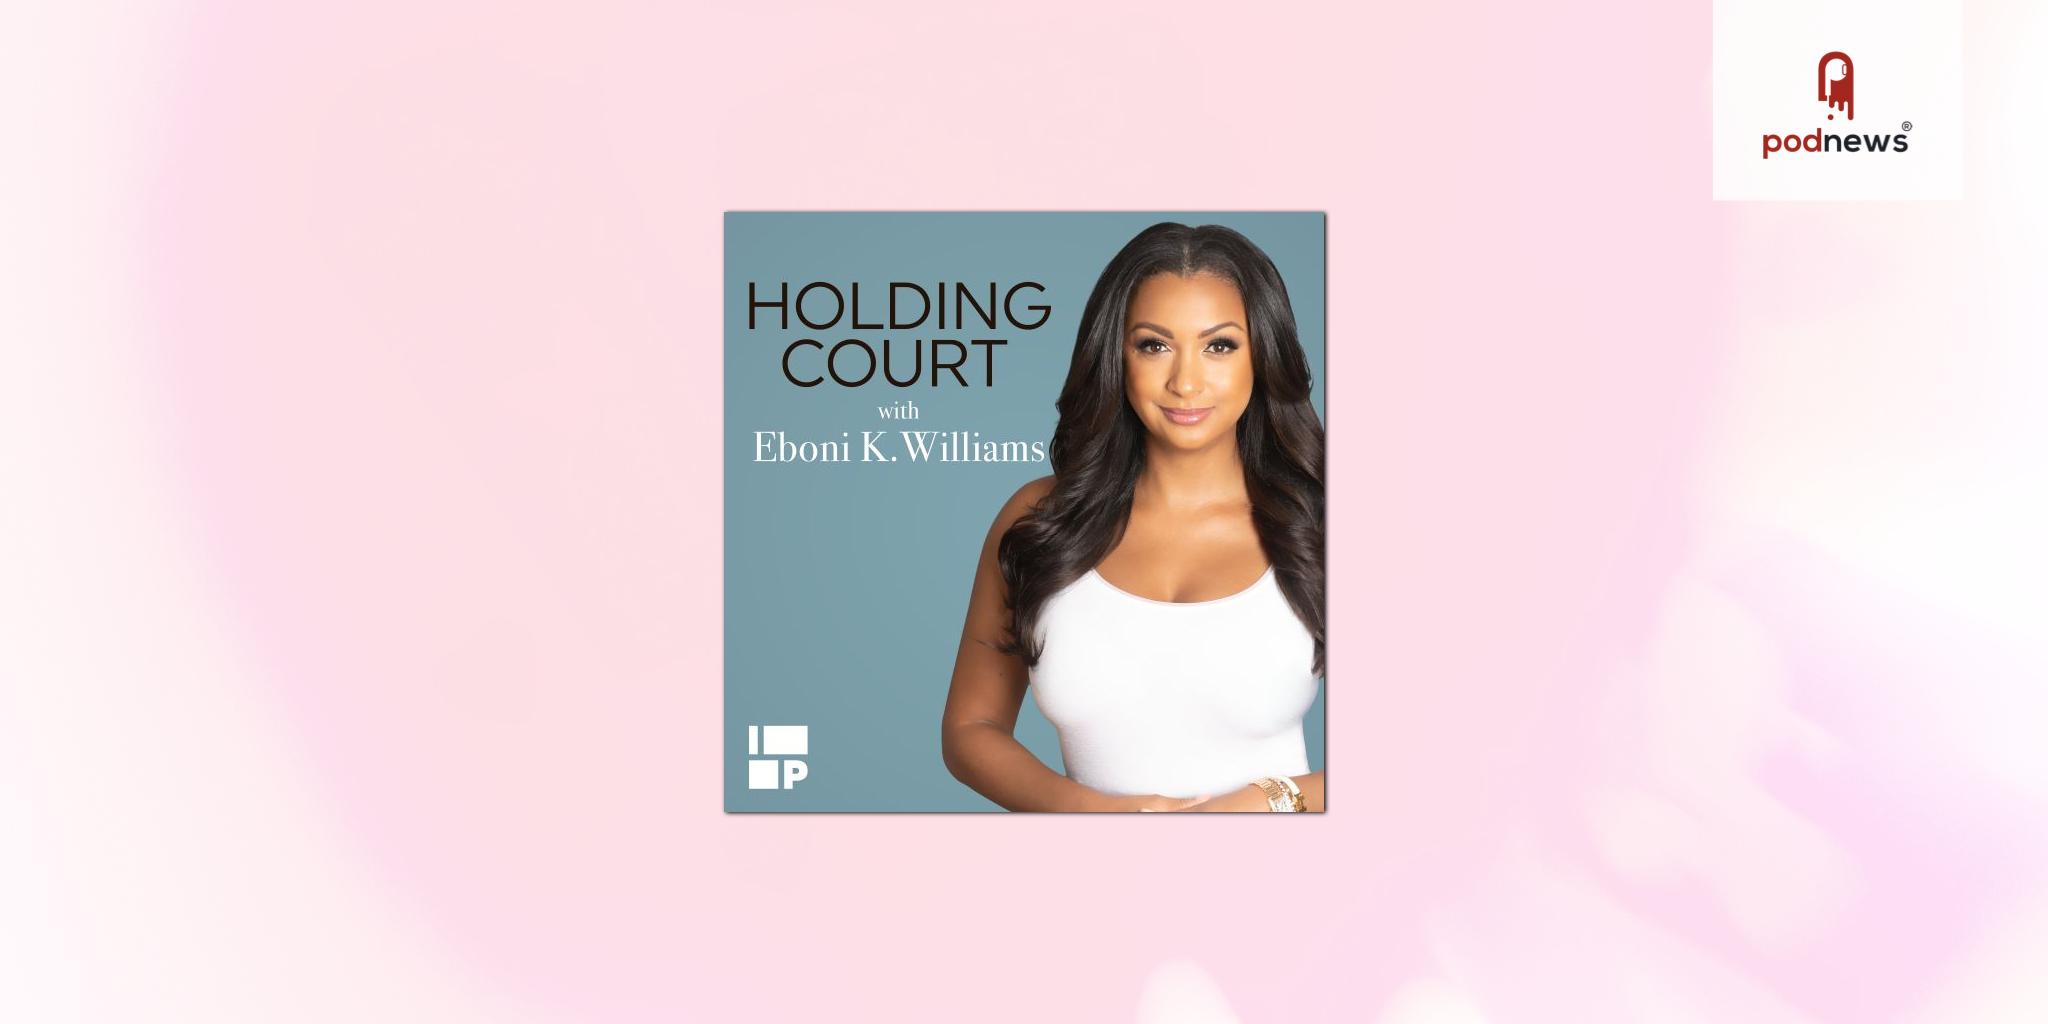 Interval Presents Welcomes Holding Court with Eboni K. Williams into Its Network